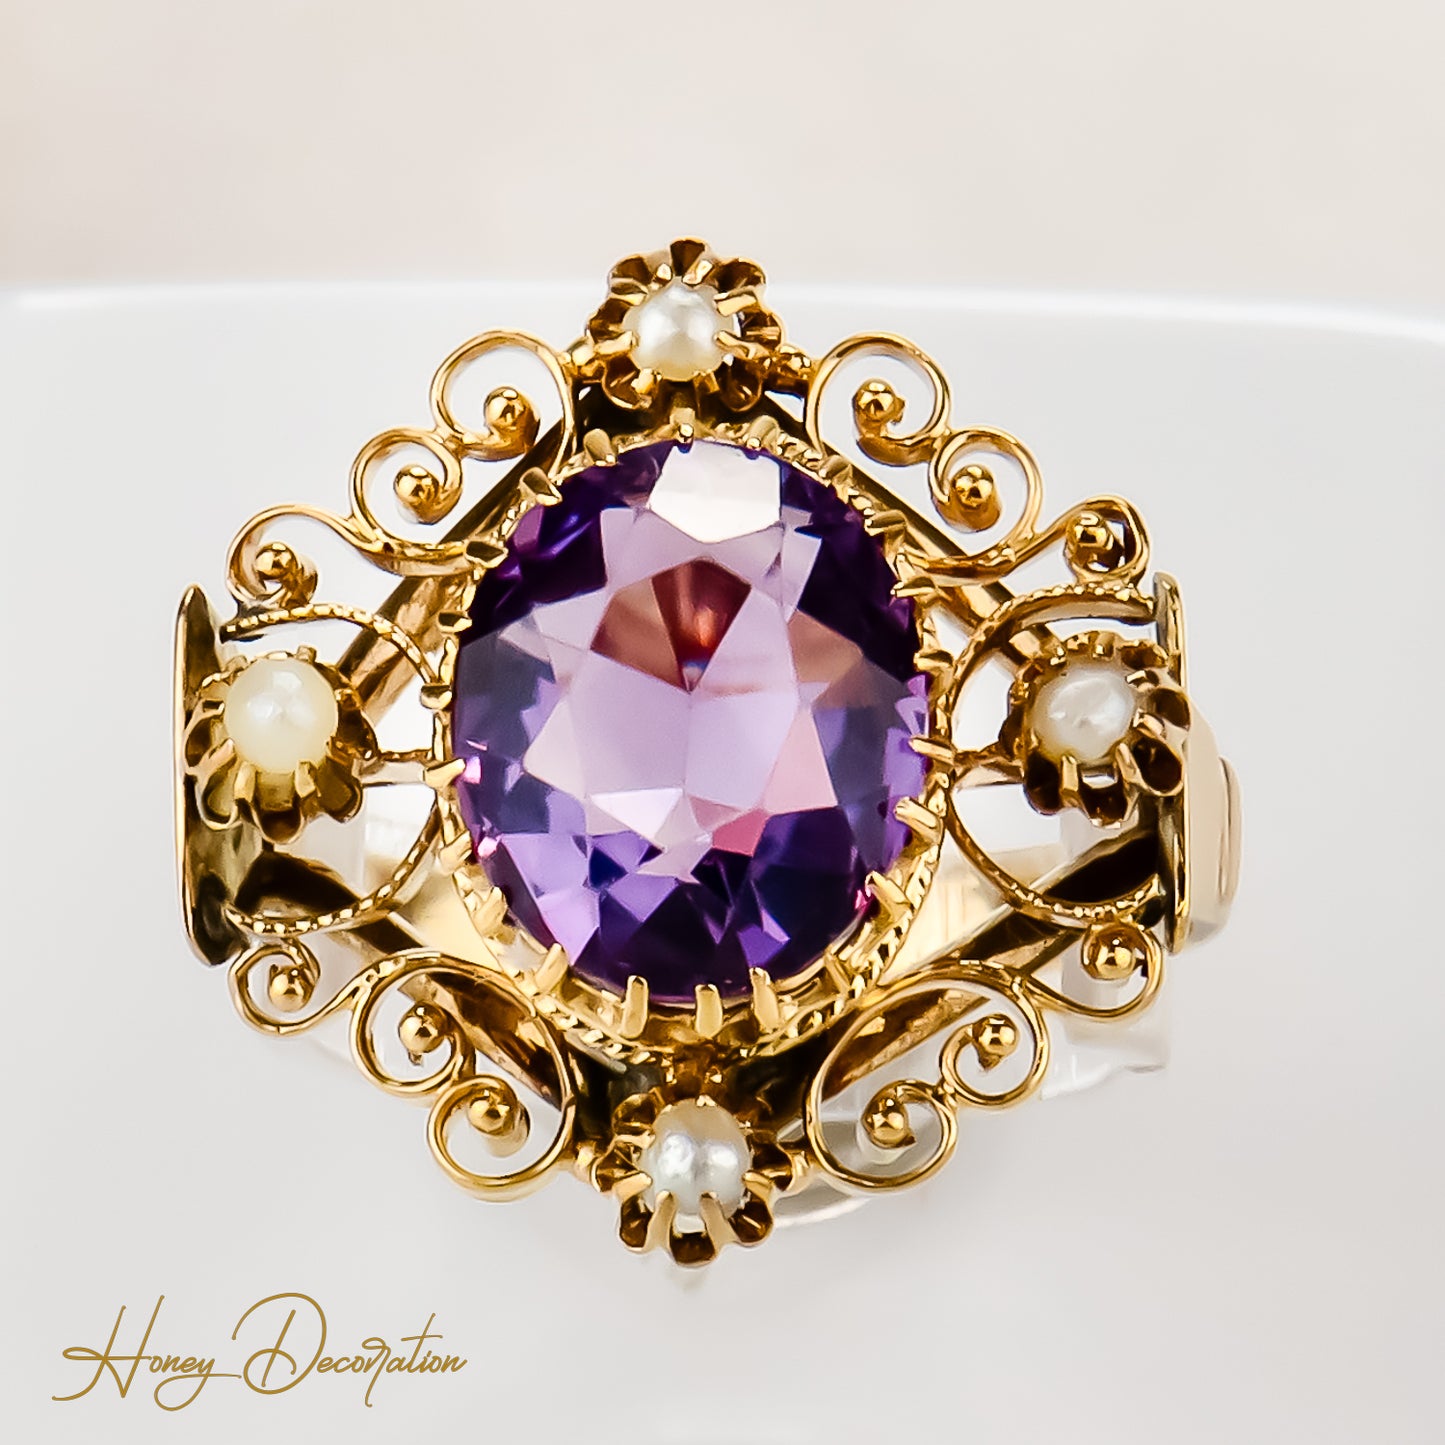 Delicate antique amethystring made of 8 carat gold, a touch of magic